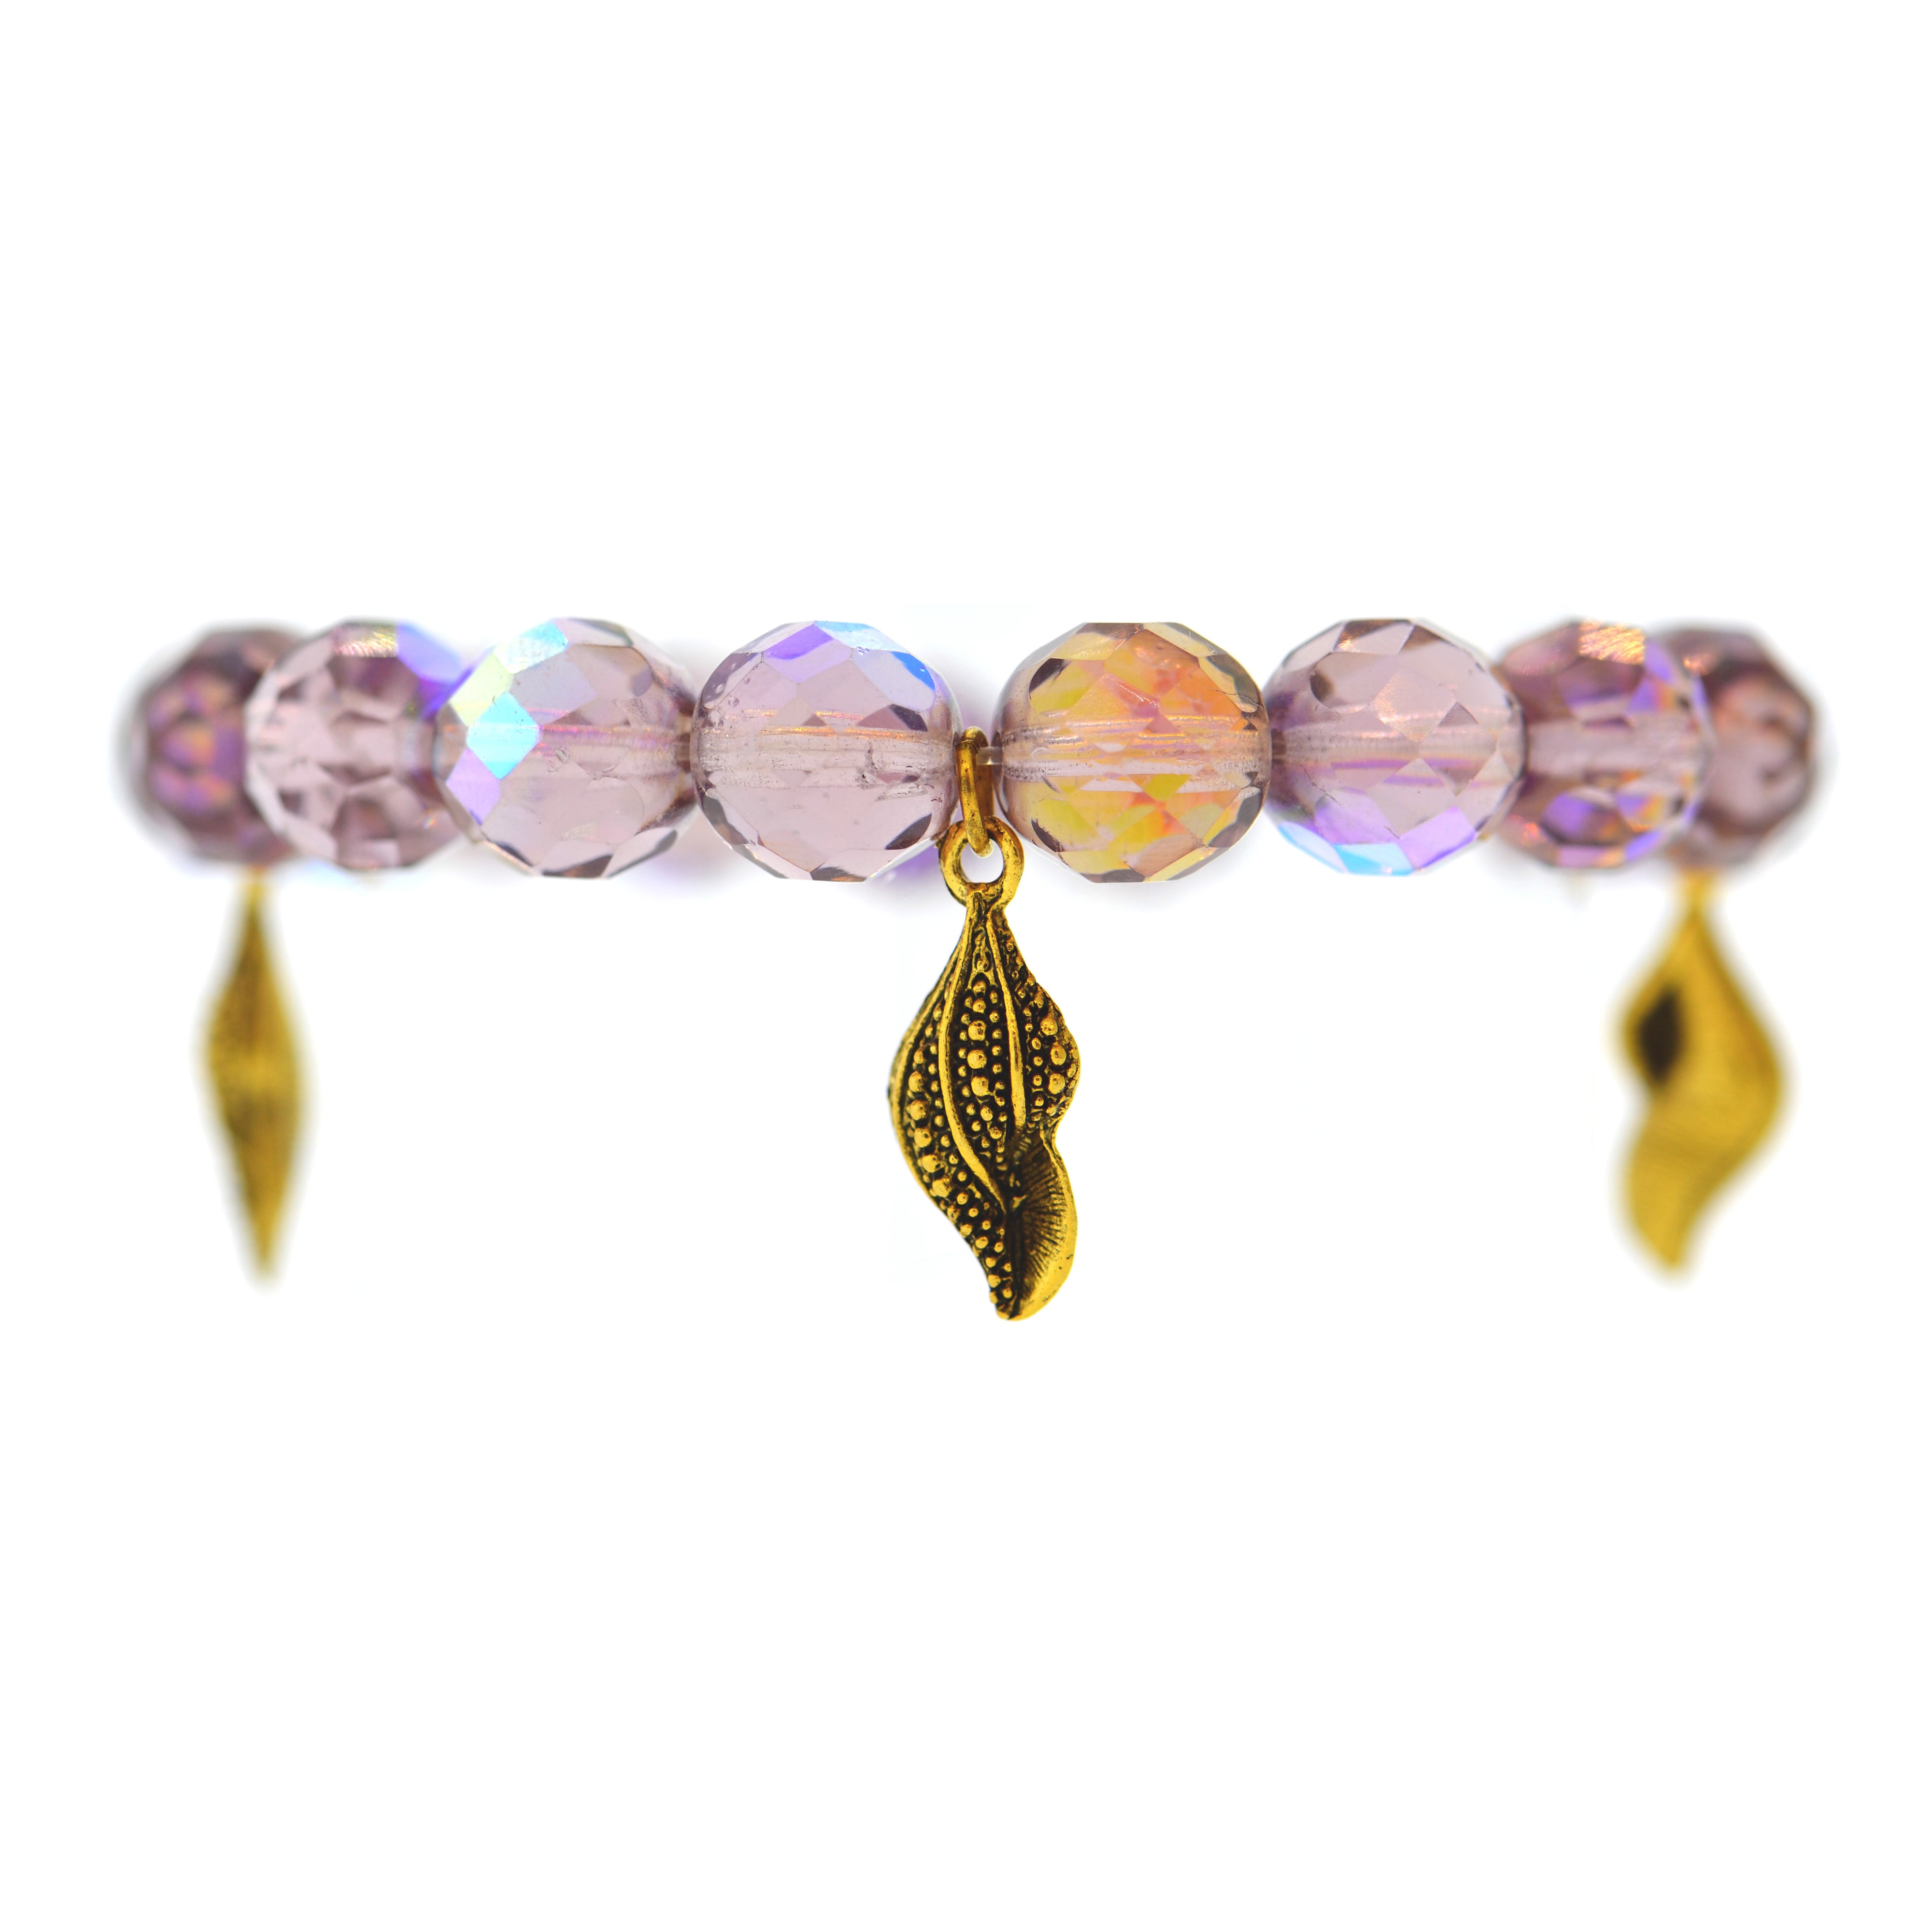 Iridescent Lavender Galapagos Conch Shell Bracelet